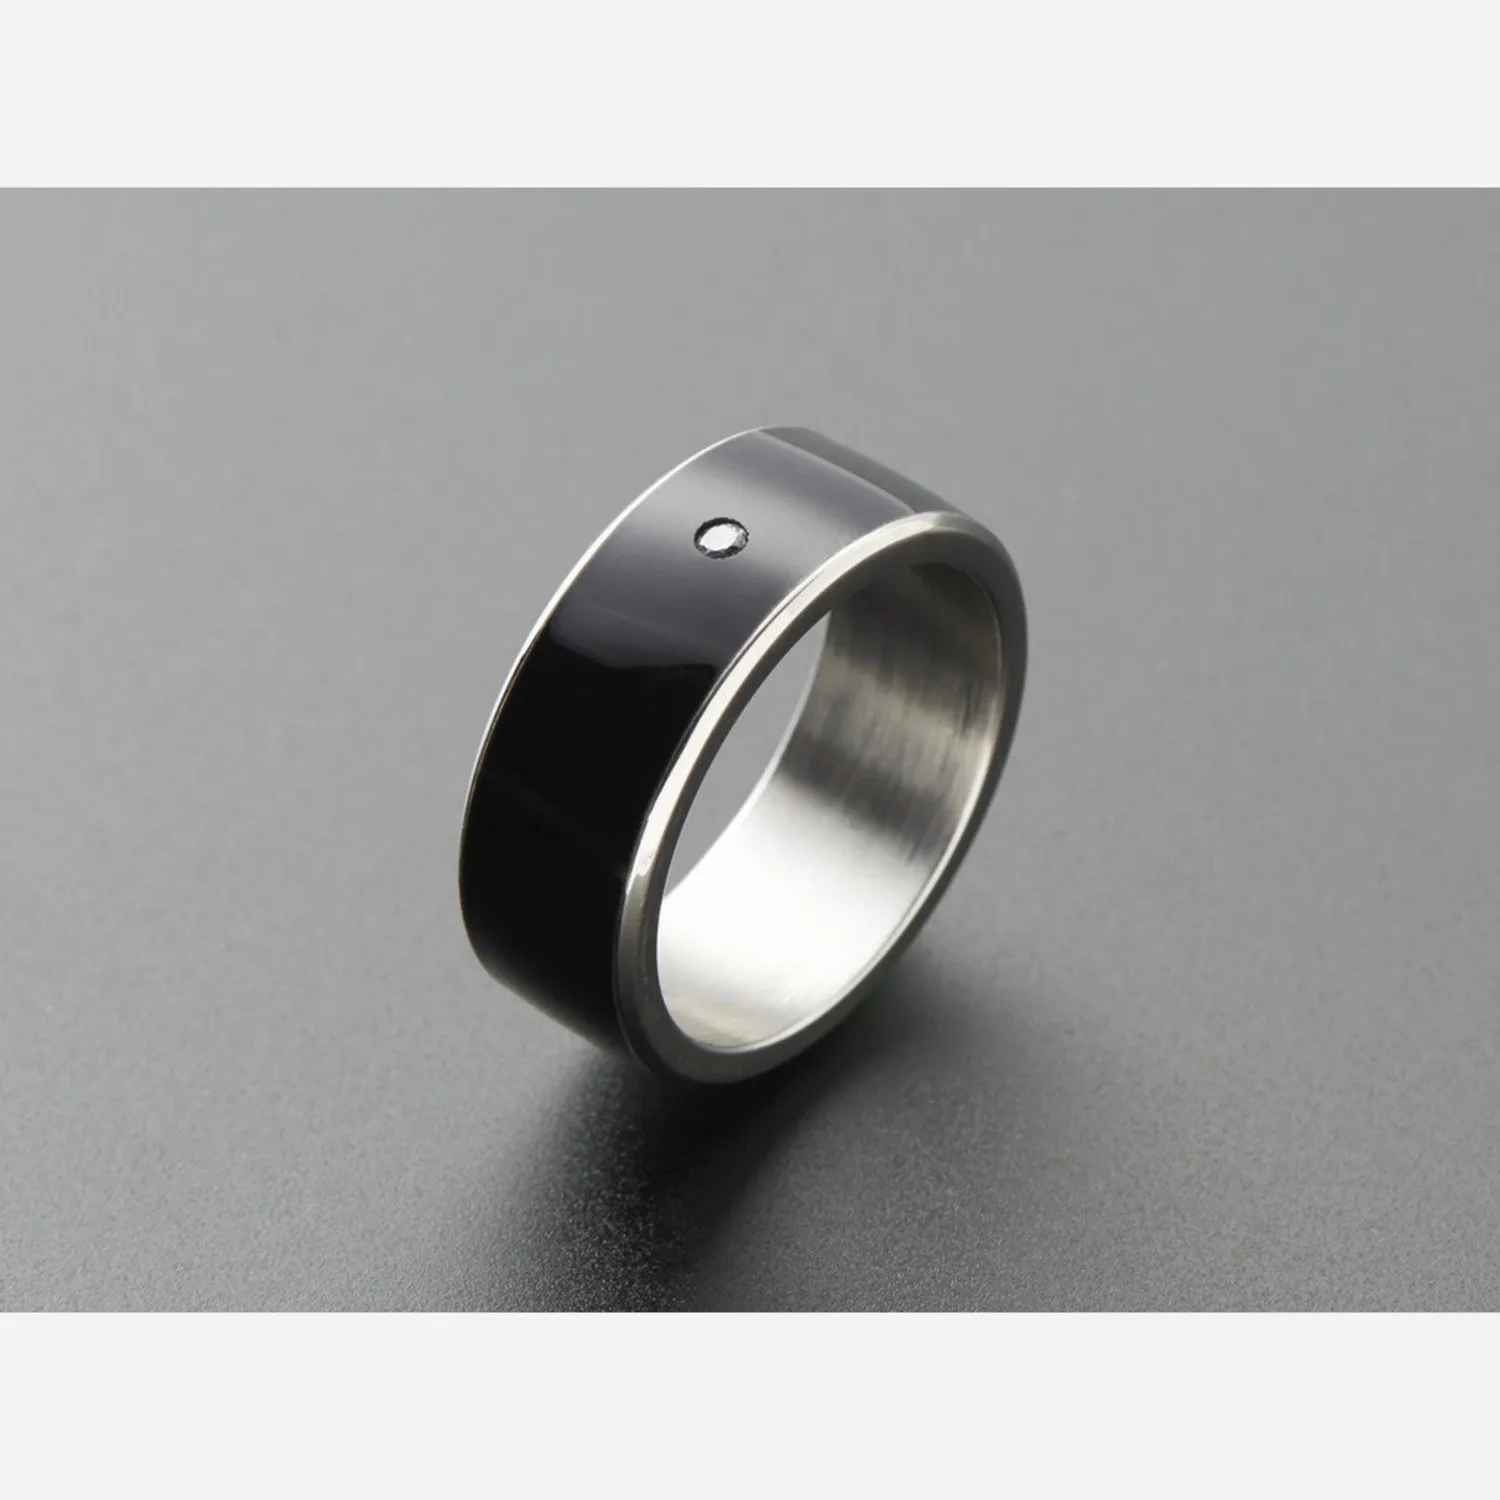 Photo of RFID / NFC Smart Ring - Size 10 - NTAG213